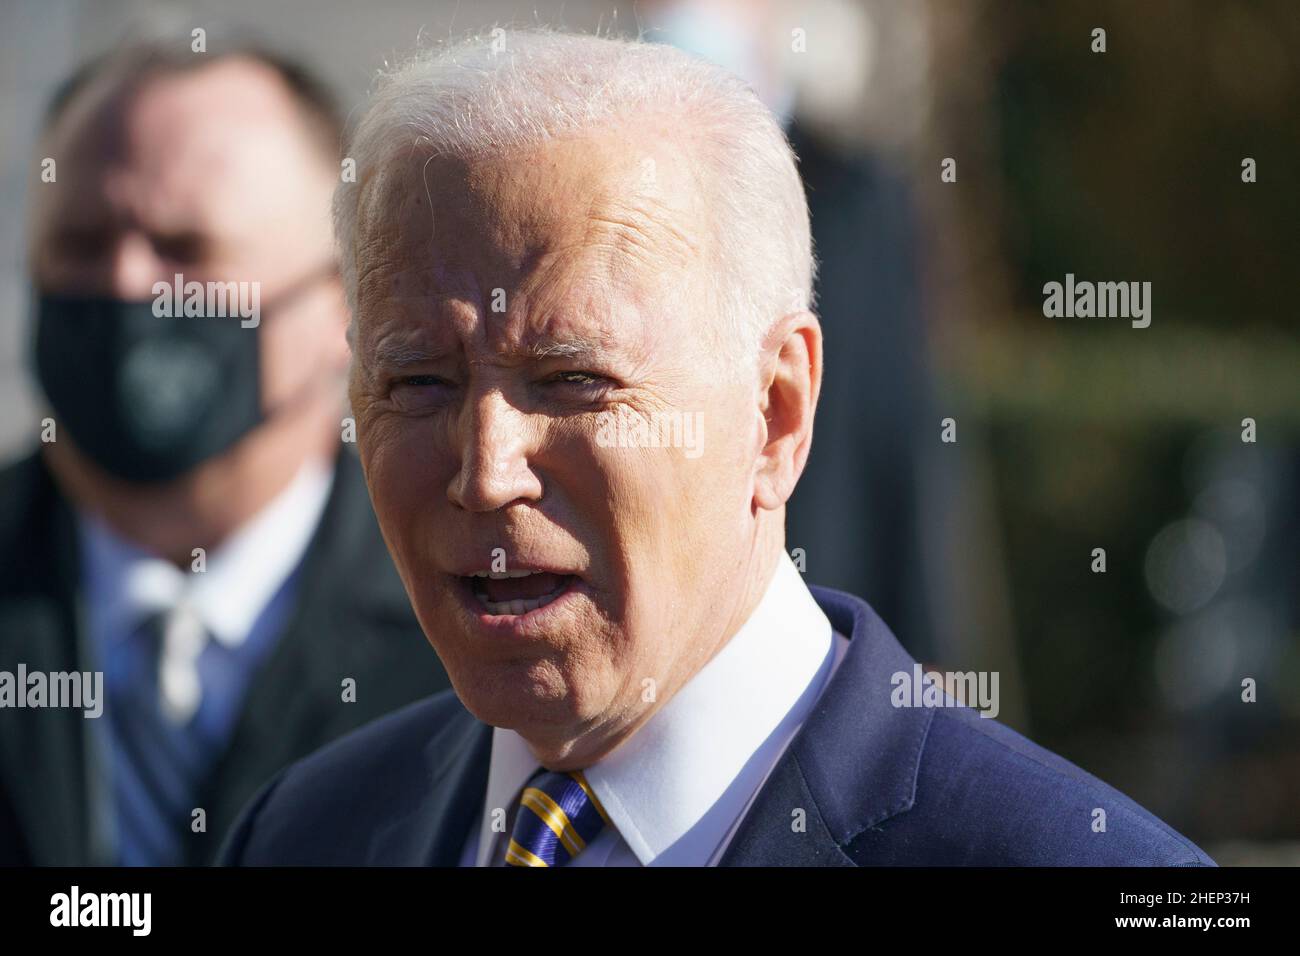 Washington, USA. 12th Jan, 2022. U.S. President Joe Biden speaks to members of the press before departing the White House in Washington, DC, the United States, on Jan. 11, 2022. U.S. President Joe Biden in a speech Tuesday in Atlanta, Georgia, said he supports changing the Senate filibuster rule so as to make it easier for the chamber to pass legislation upholding Americans' right to vote. Credit: Ting Shen/Xinhua/Alamy Live News Stock Photo